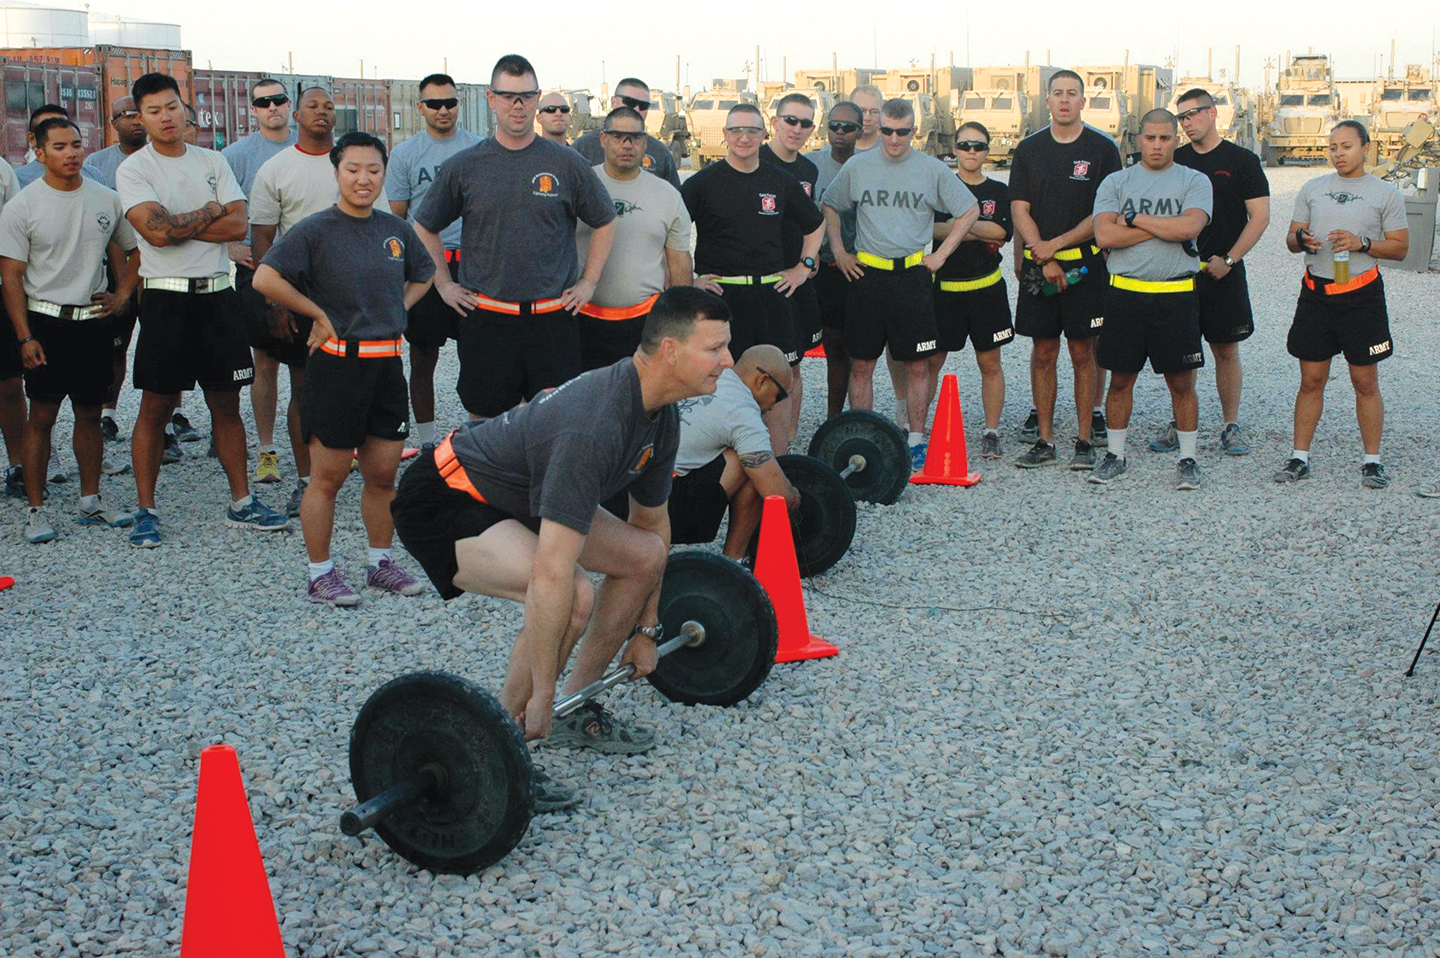 Maj. Gen. Jeffrey Drushal ’89 is internationally ranked 1,407th in his division (men aged 50-54) in the CrossFit exercise program